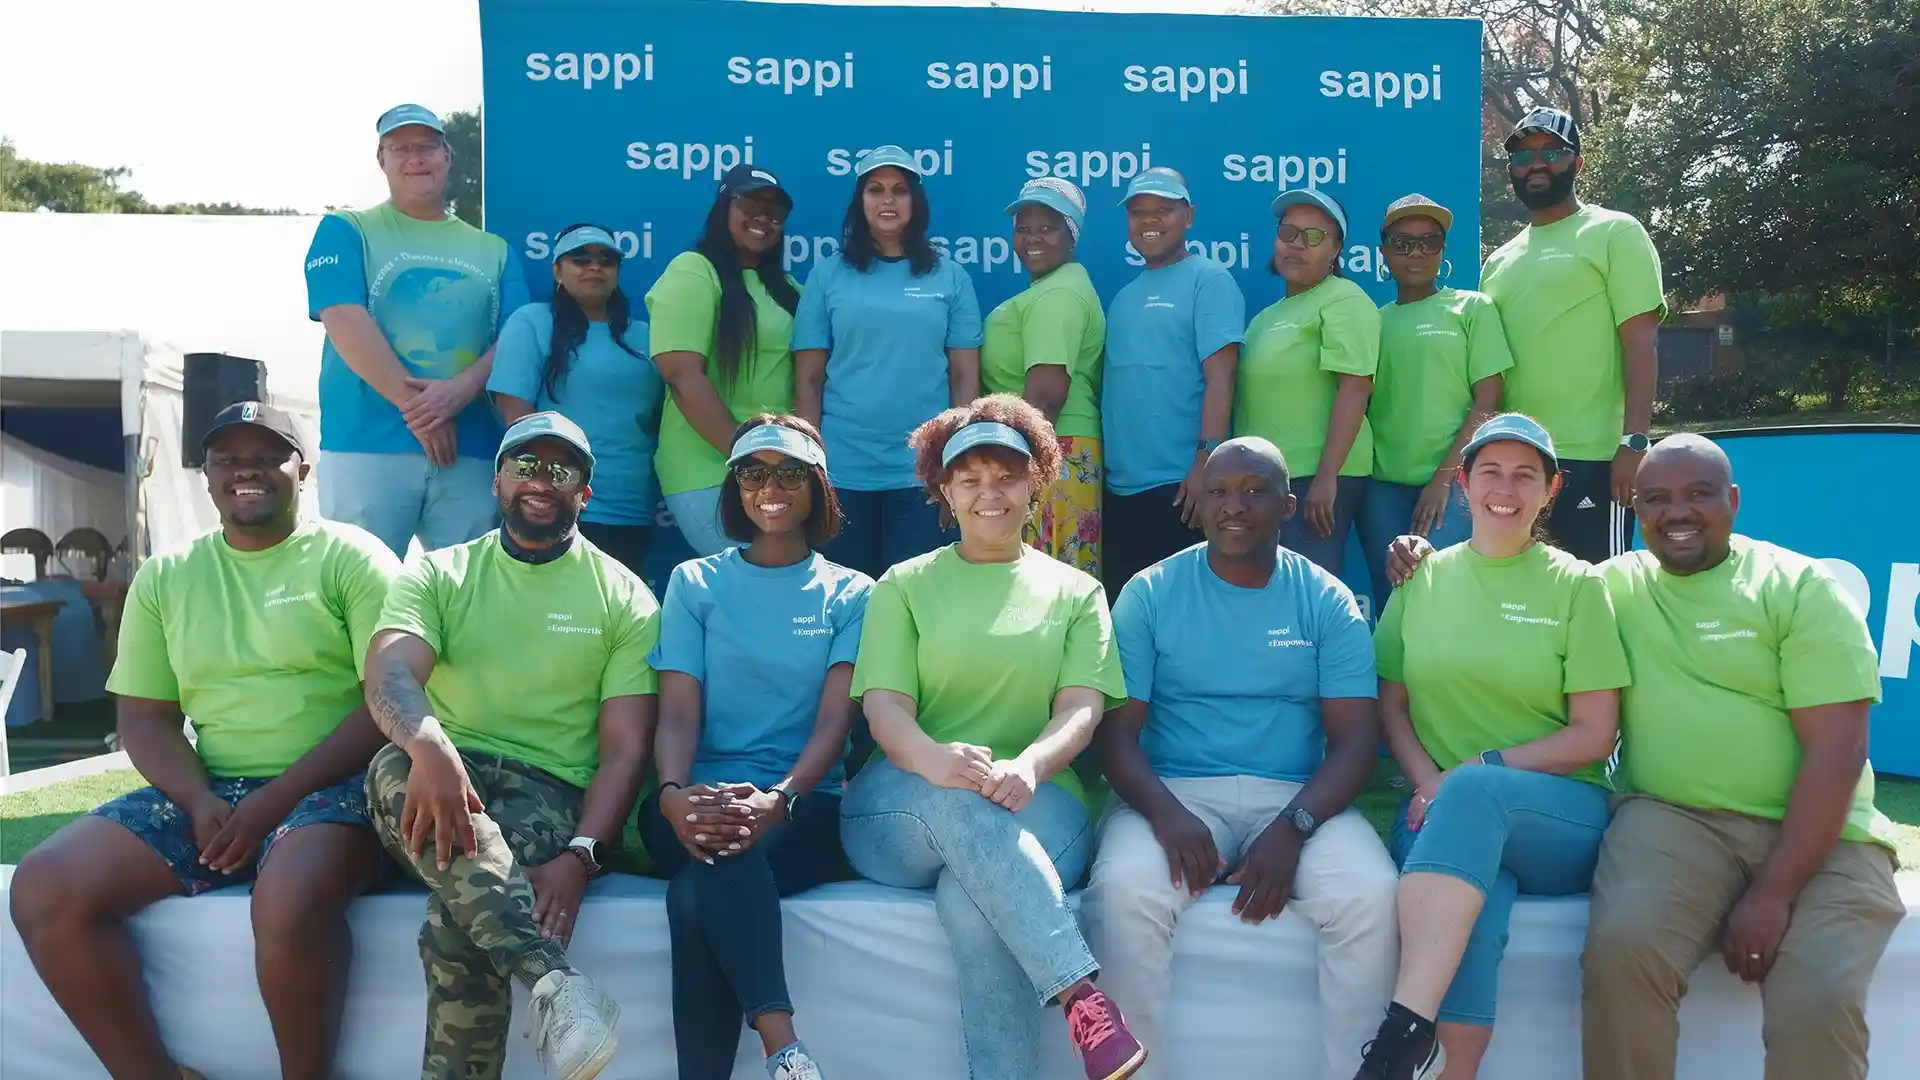 The Sappi team for the launch of the netball programme at a community tournament.